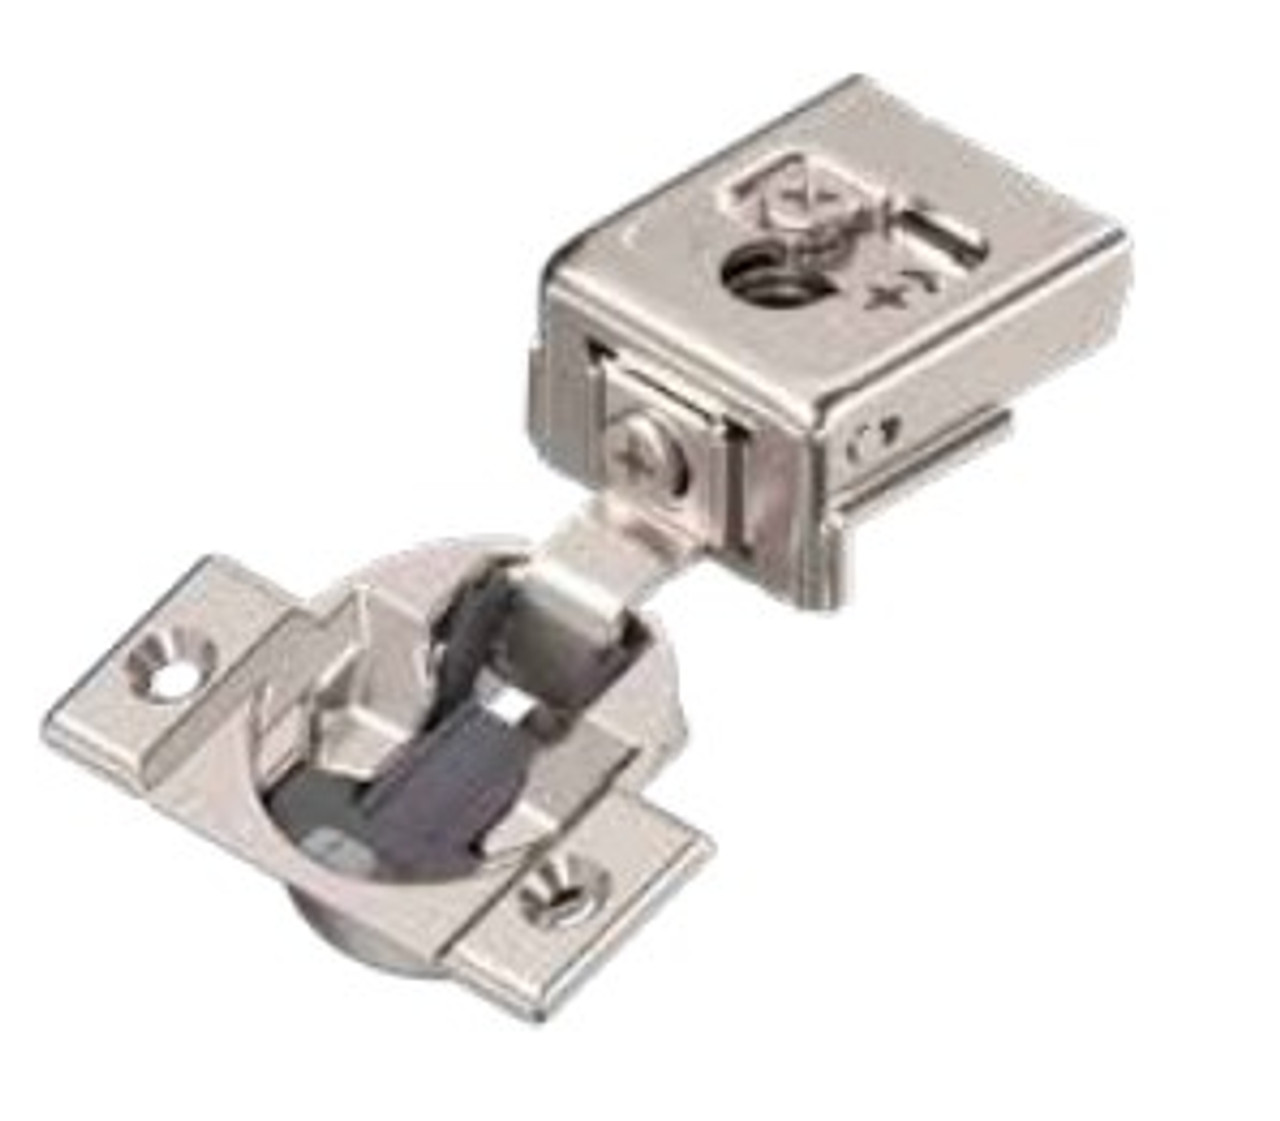 BLUM COMPACT CLIP Hinges Screw On With Soft Close 30C255BS